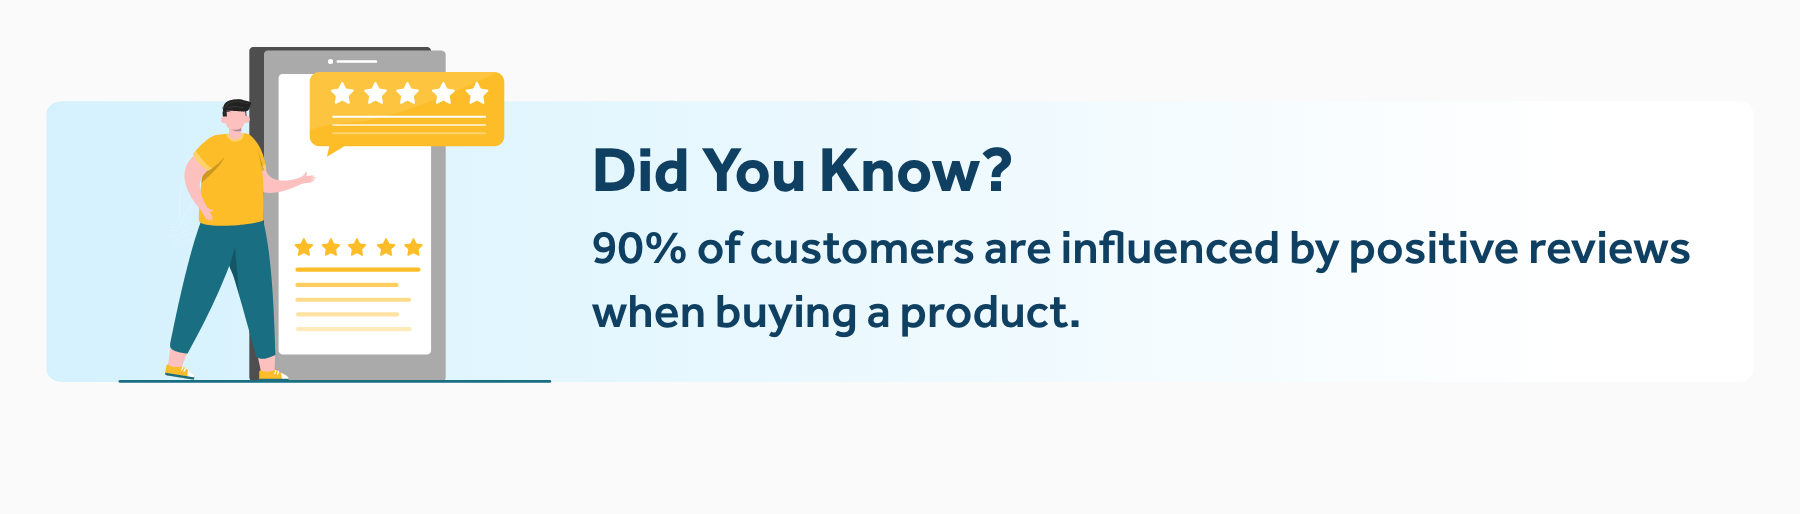 CS - {How Shipping Impacts the Customer Experience for eCommerce Businesses} Did You Know - 2